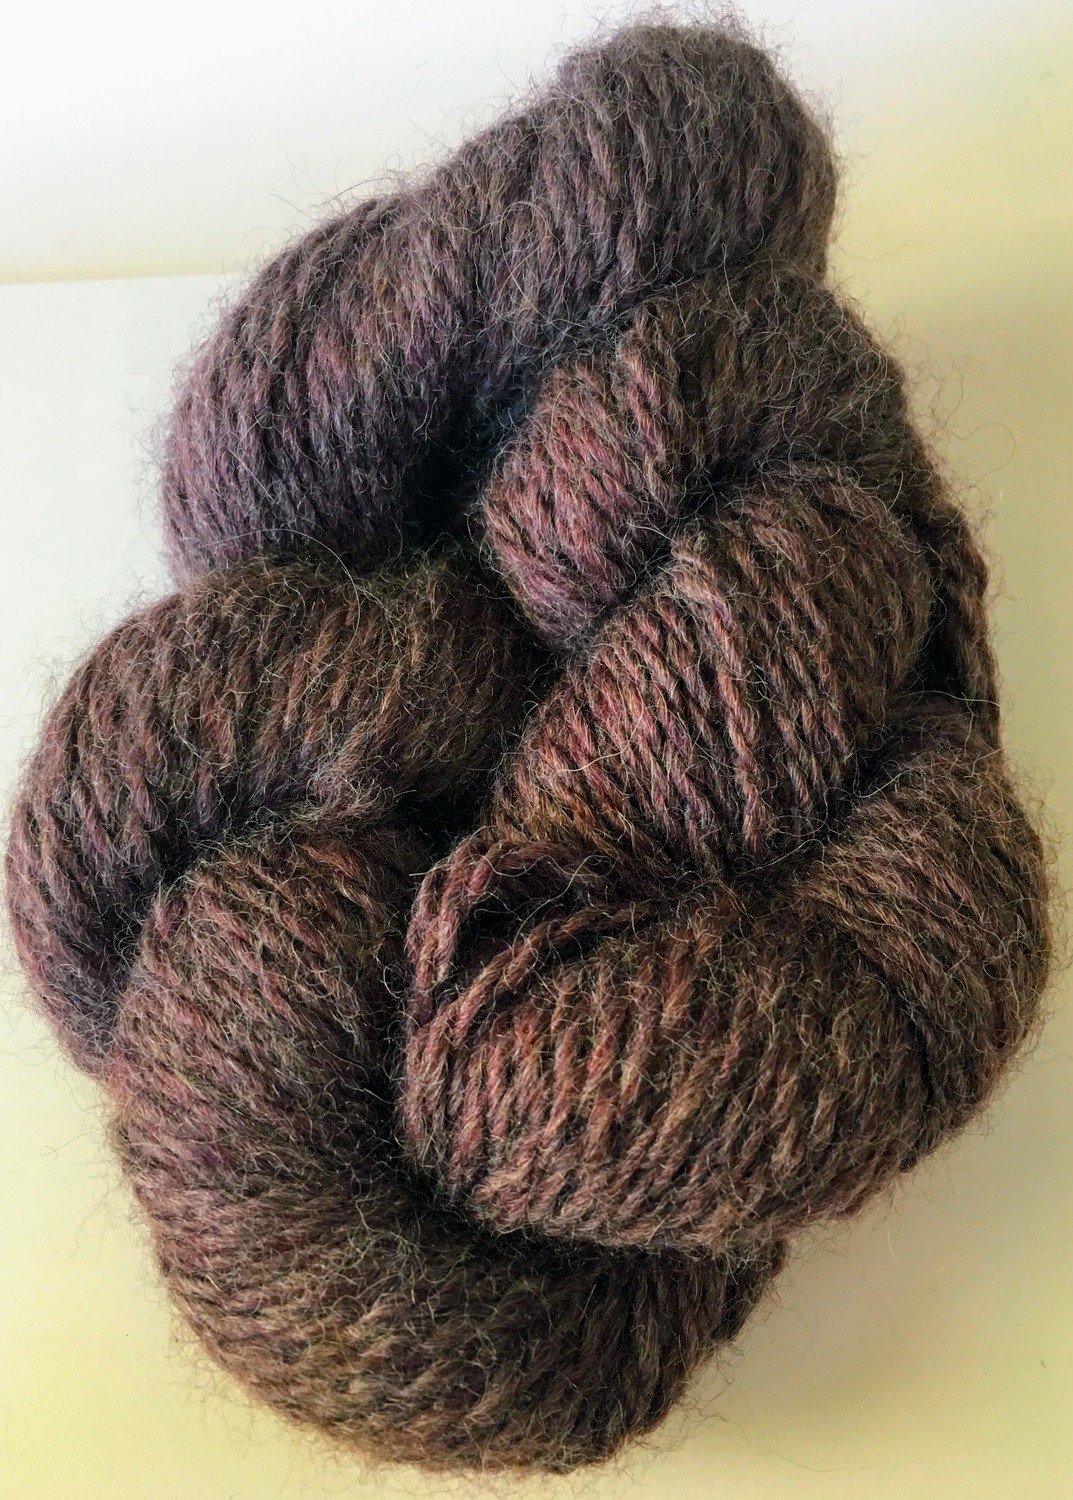 Breezy Hill Cottage-Milled, Hand-Dyed Yarn - Dusty Plum